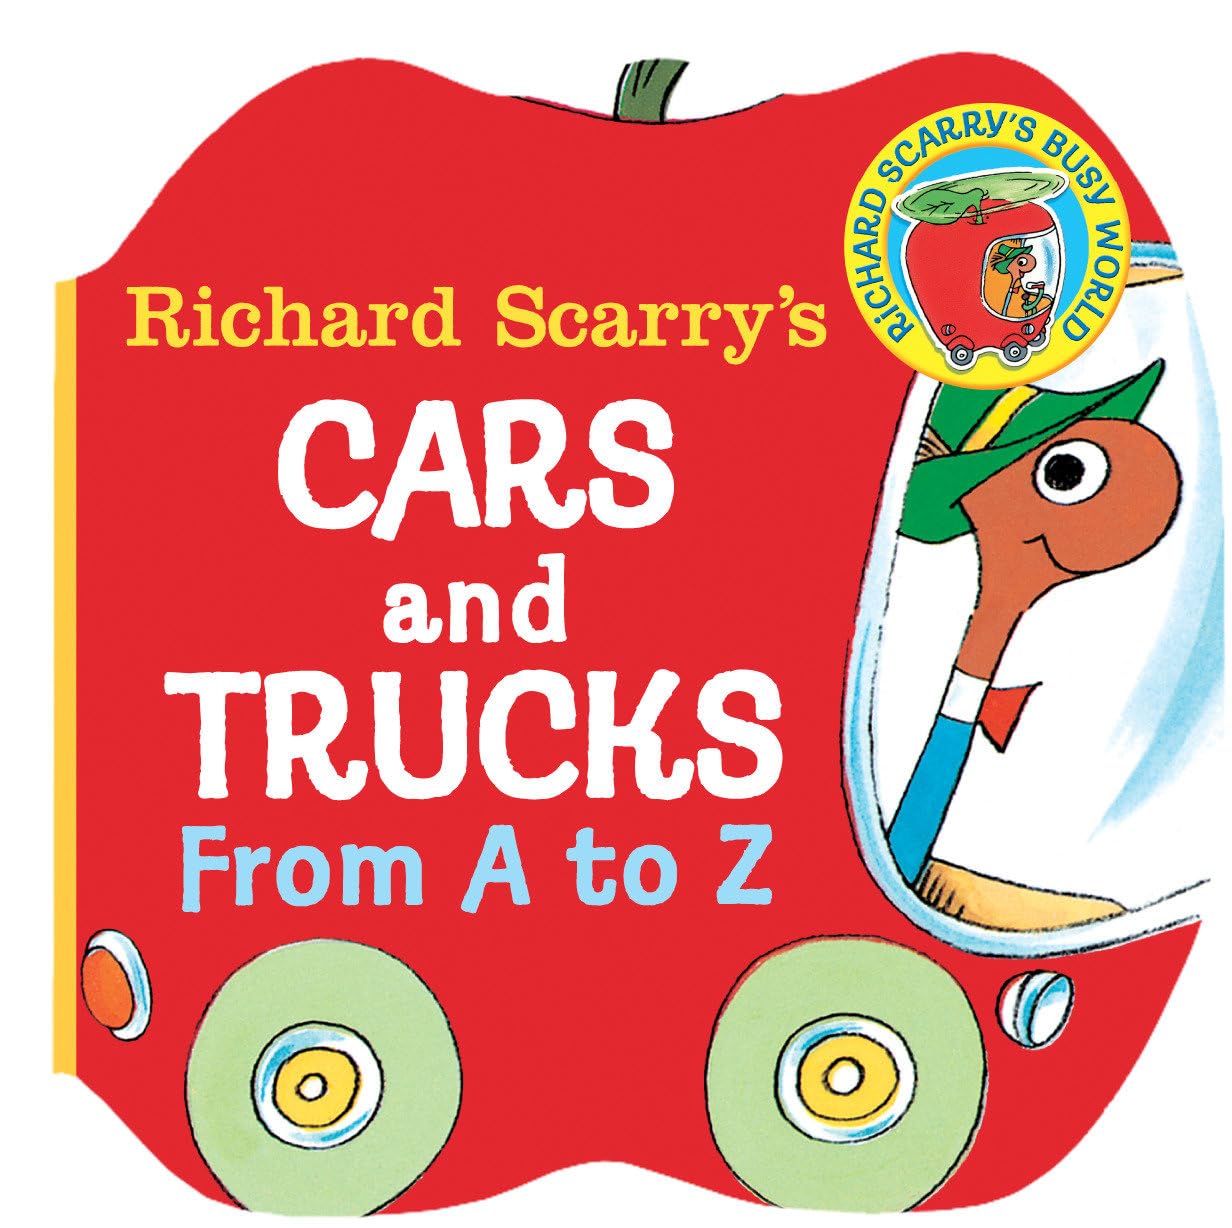 Richard Scarry's Cars and Trucks from A to Z by Scarry, Richard